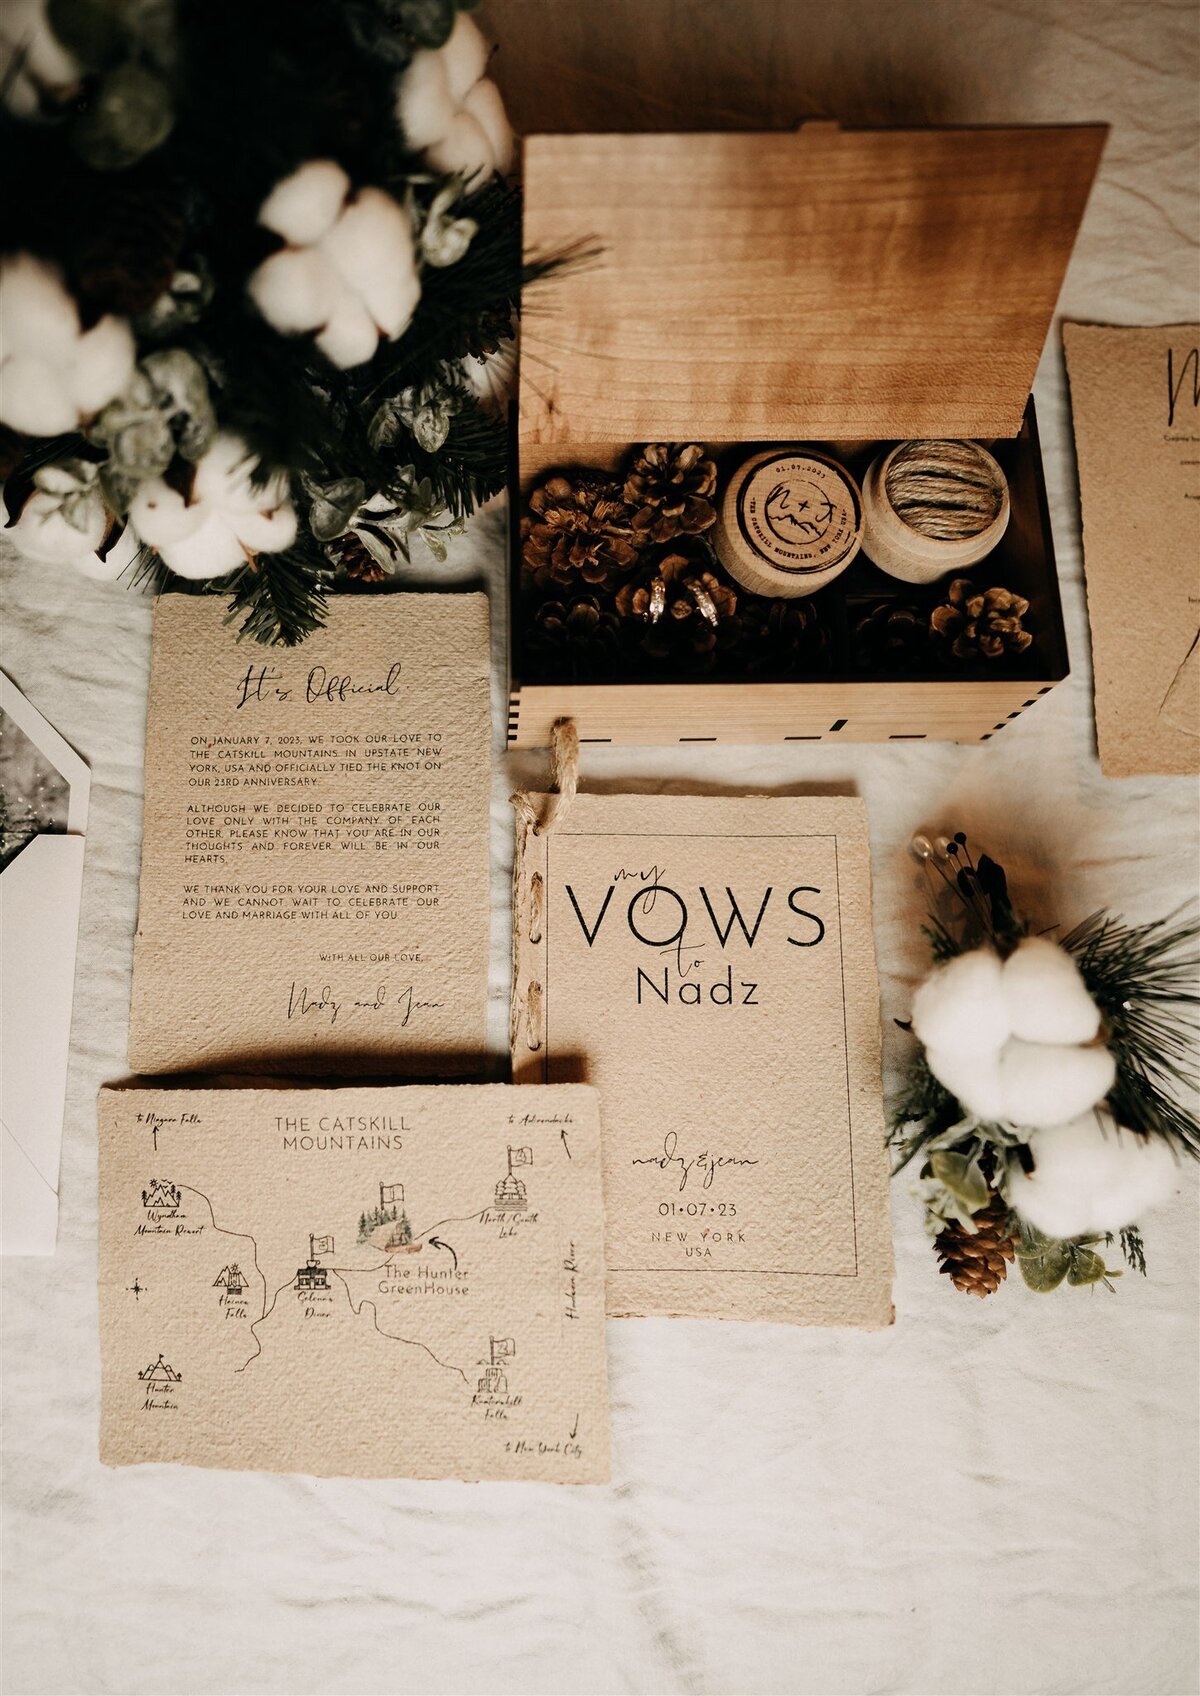 Detail image of elopement vow books and details